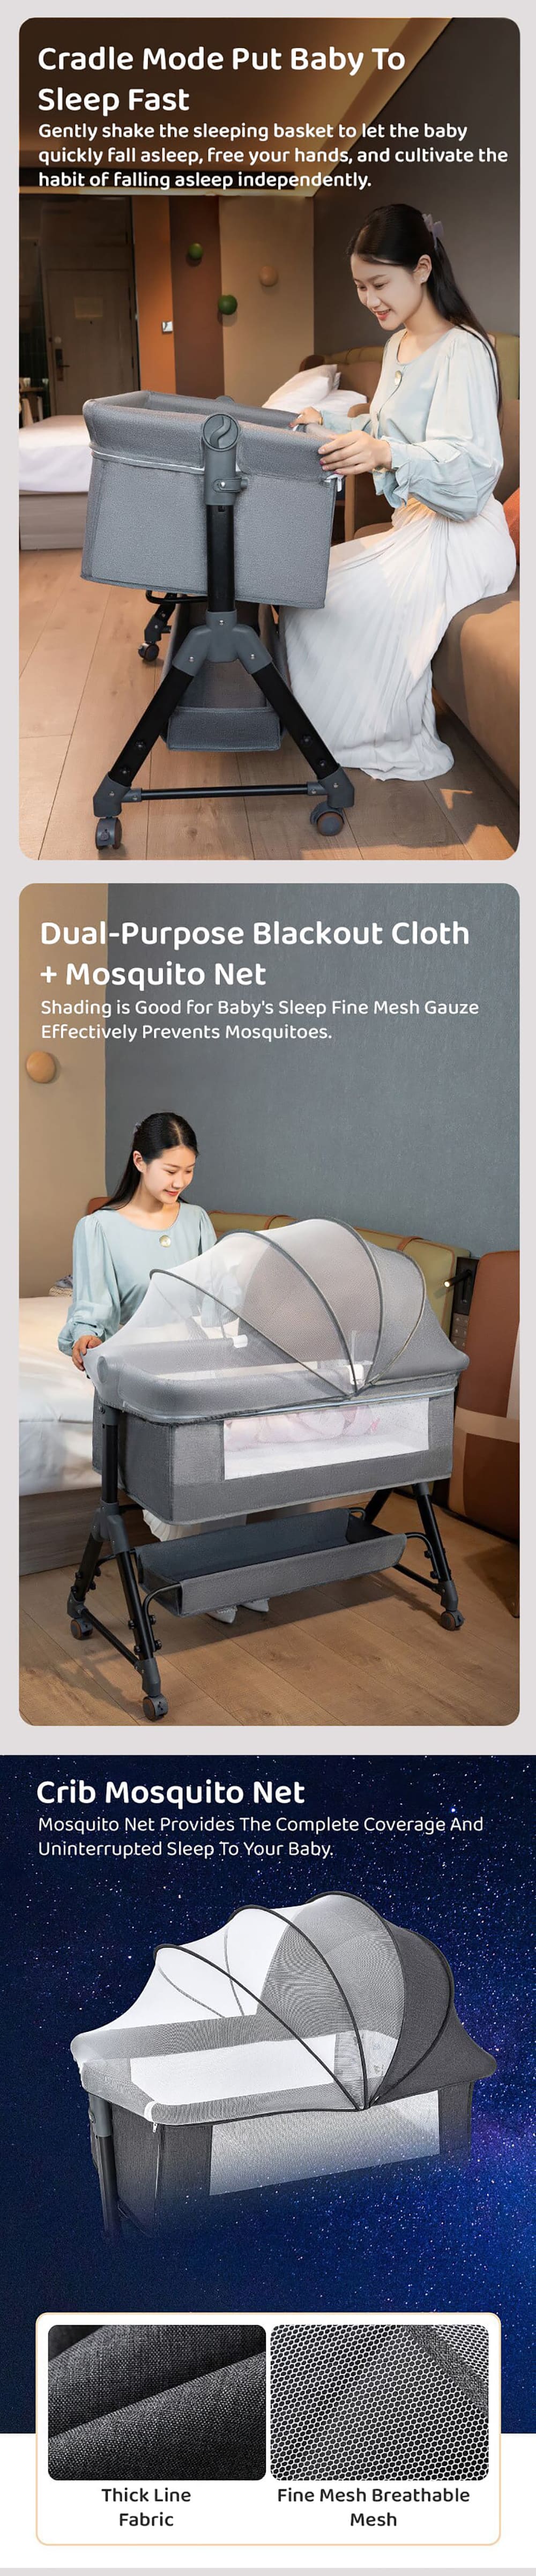 cradle for baby